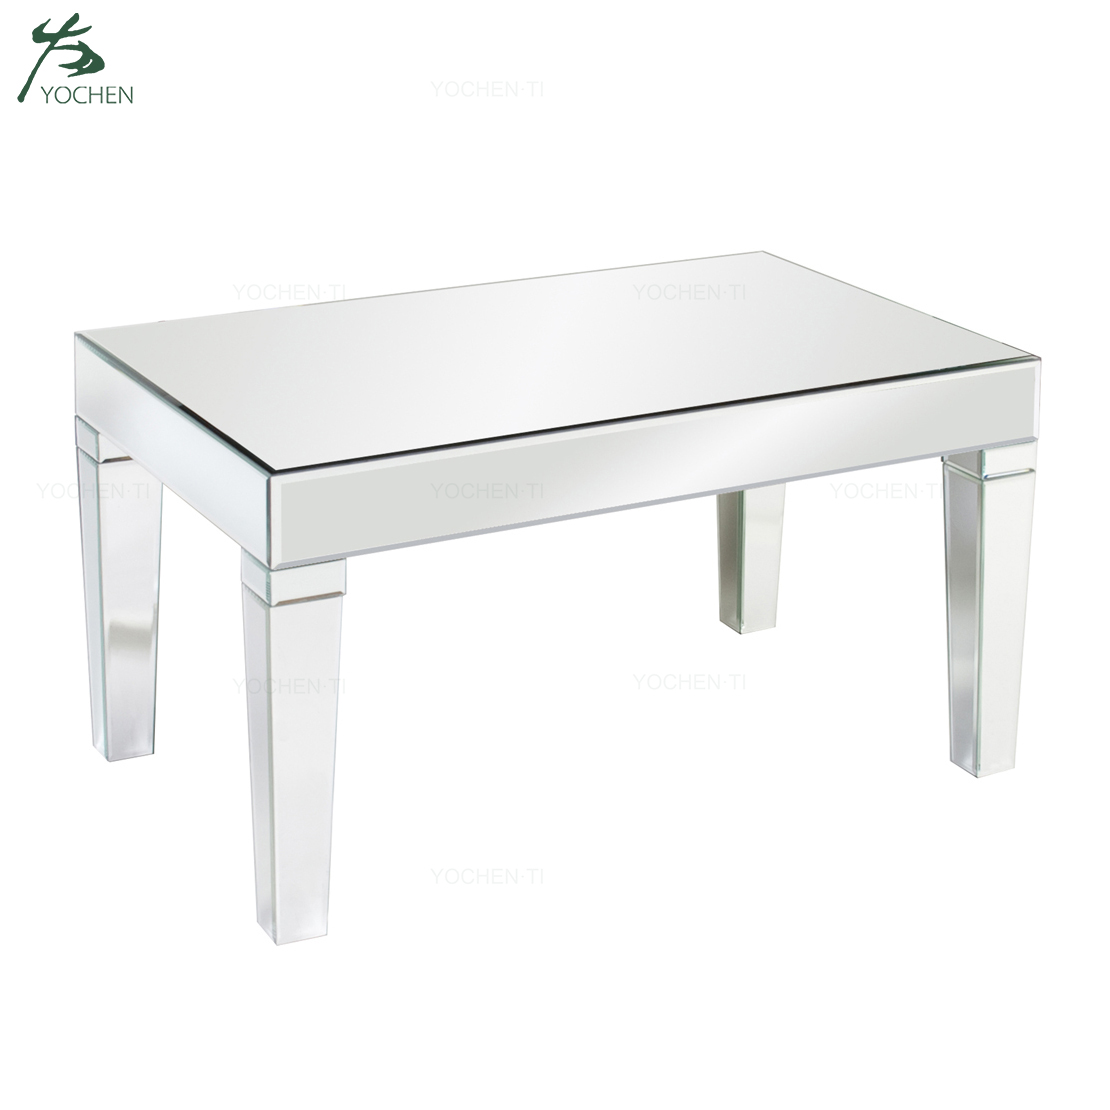 Modern style mirrored furniture living room console table with 2 drawers